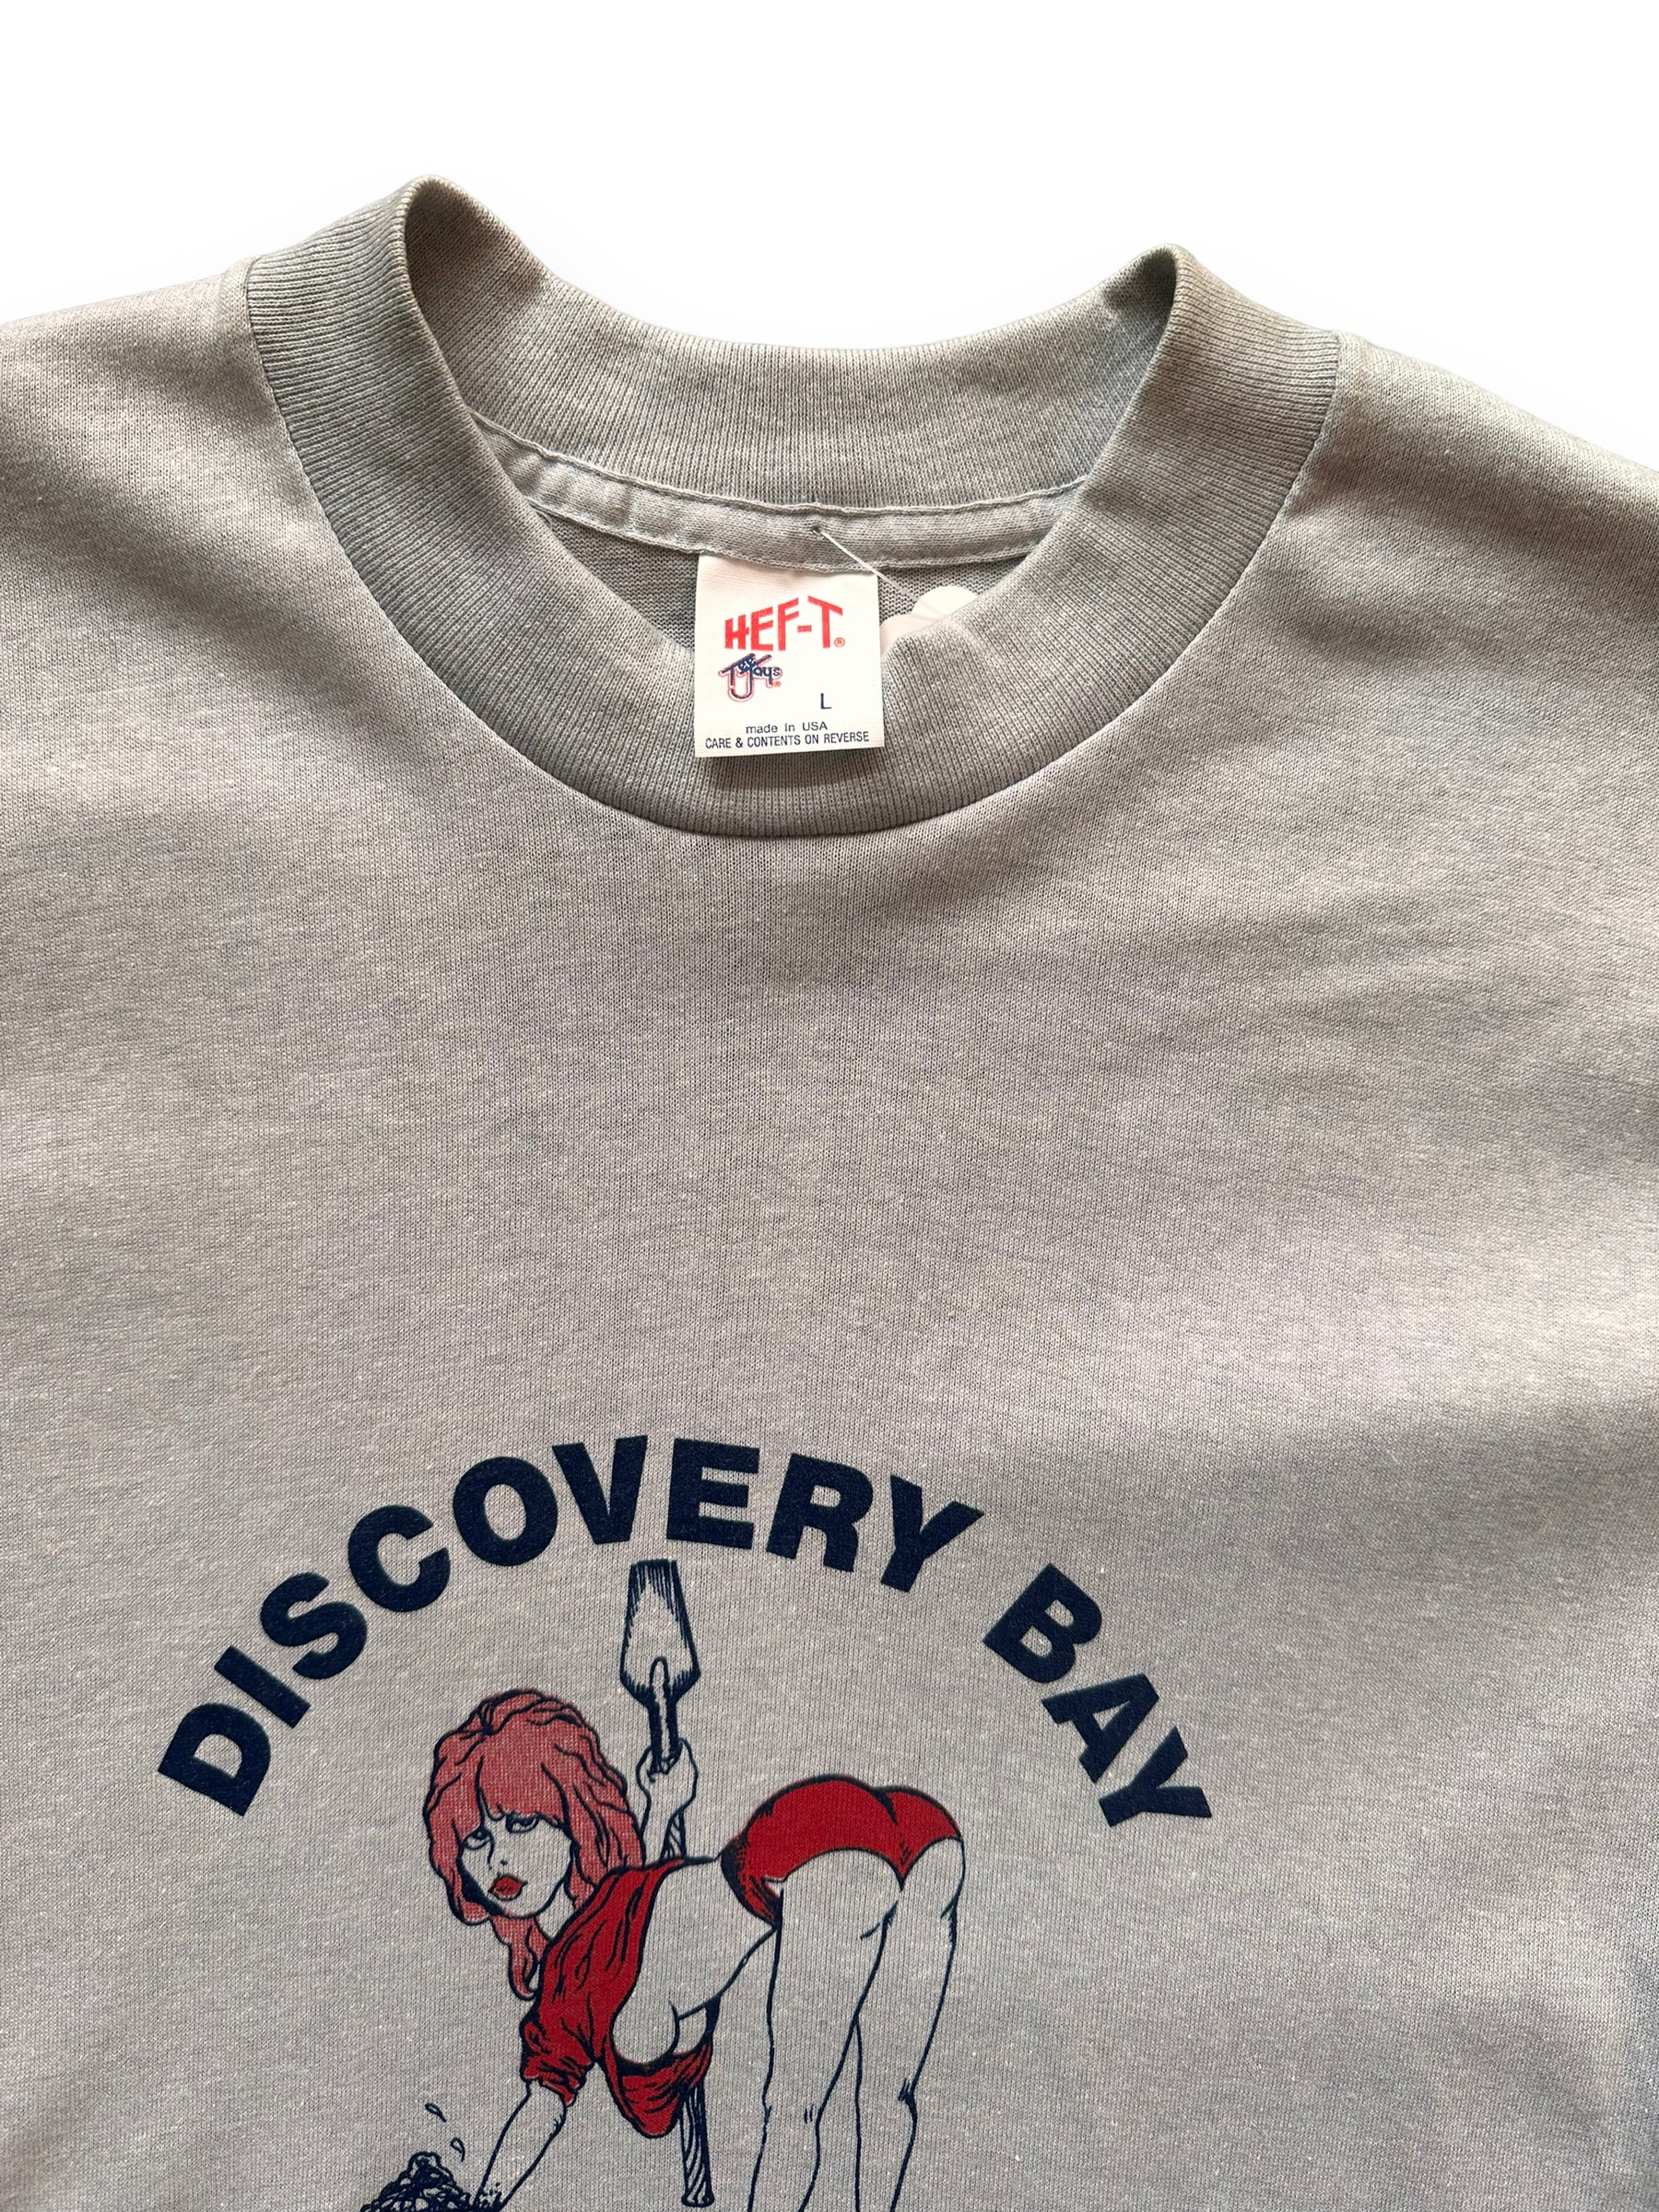 Tag View of Vintage Discovery Bay Tavern Tee SZ S |  Vintage Port Townsend Steamed Clam Tee | Vintage Clothing Seattle